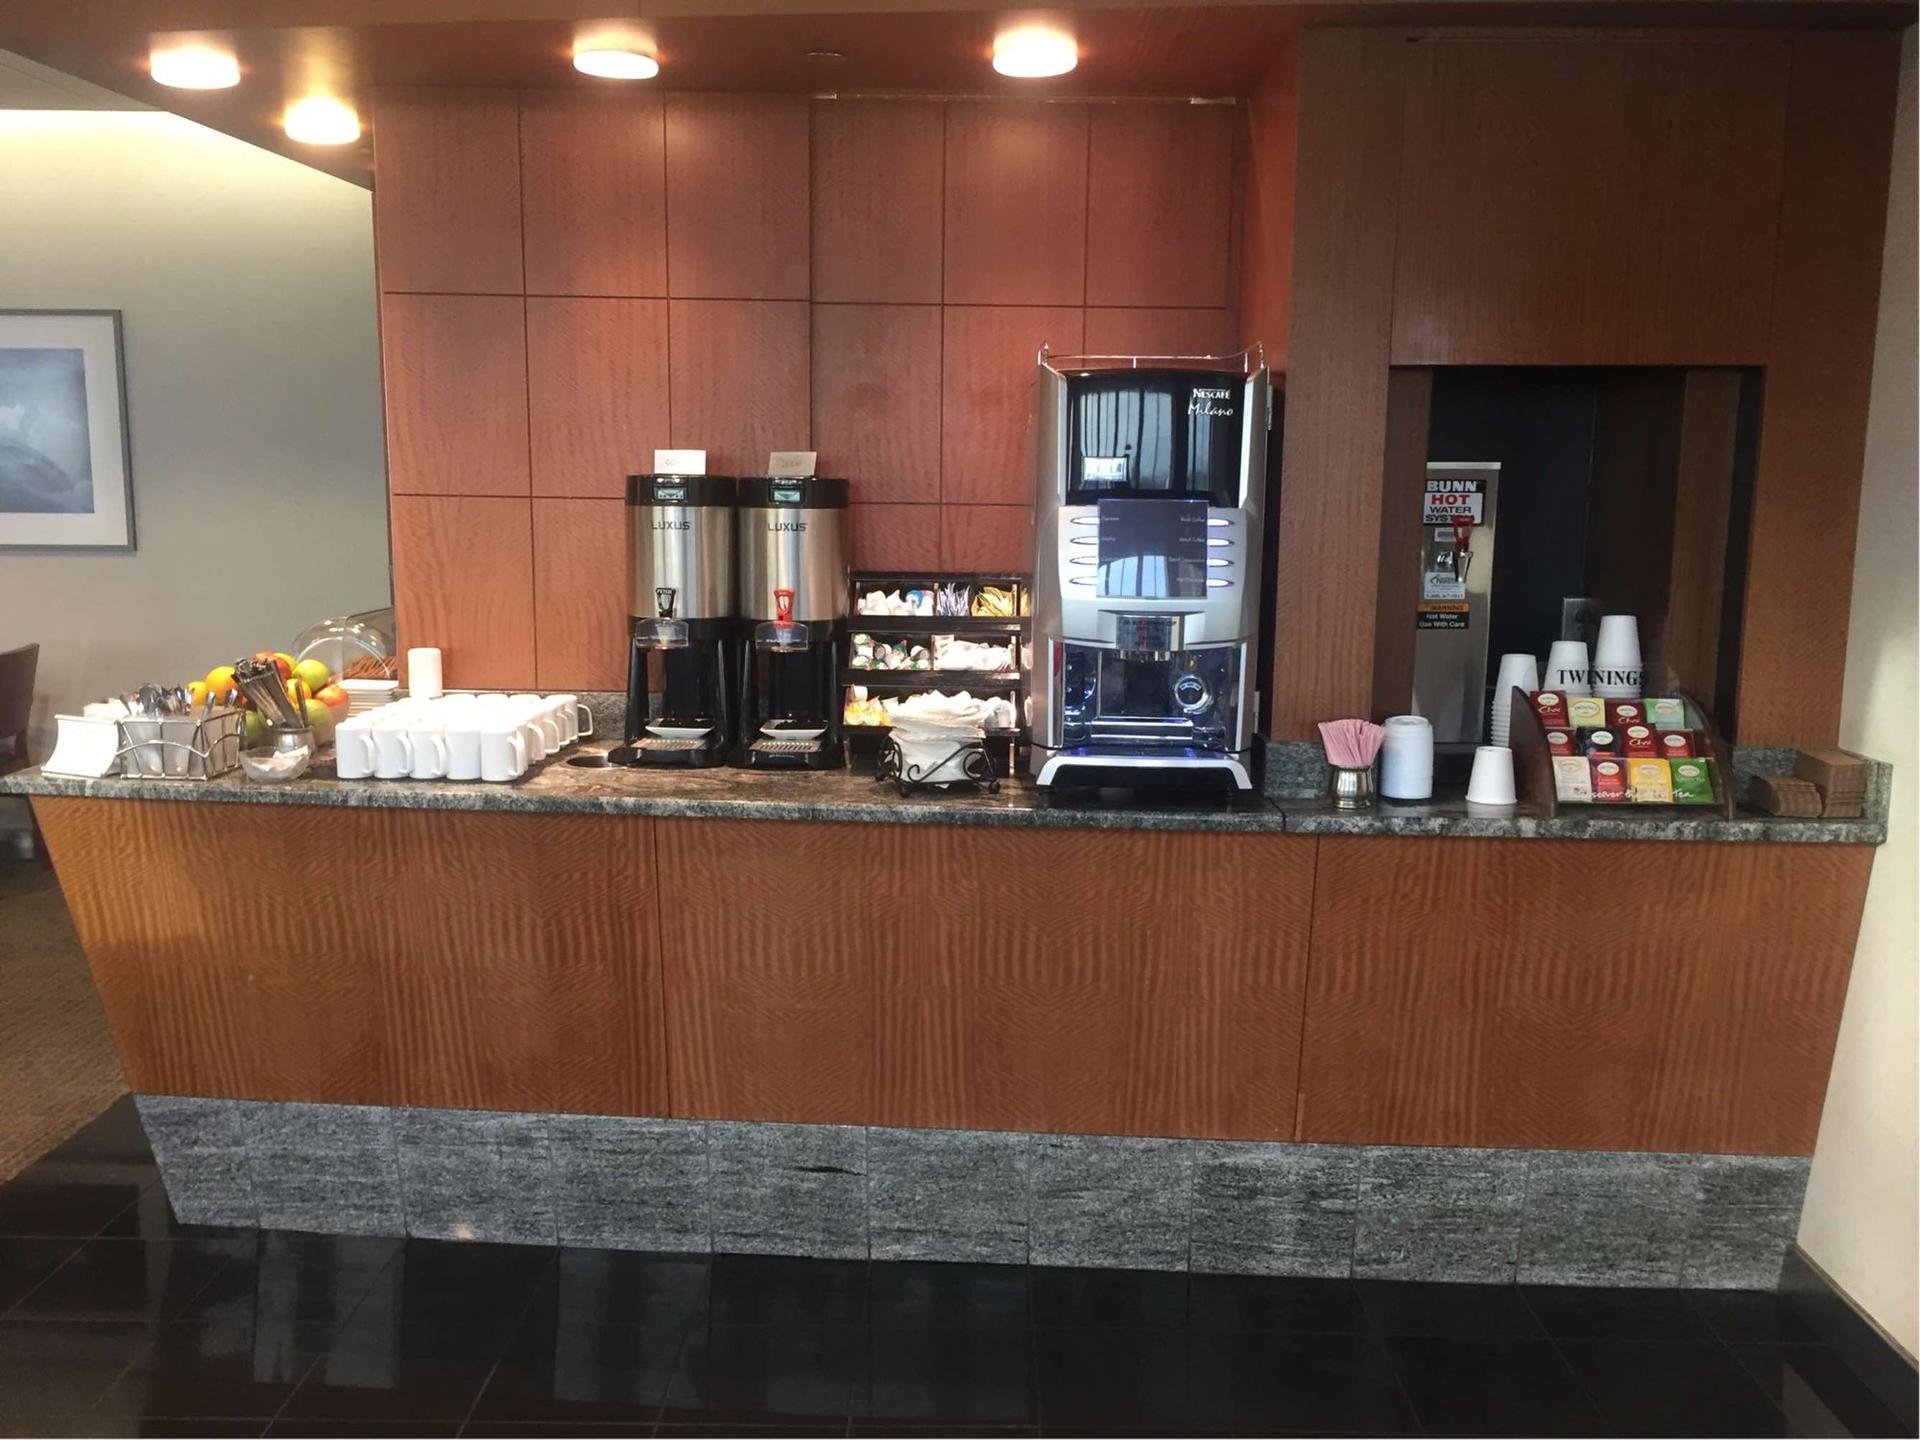 American Airlines Admirals Club image 39 of 48